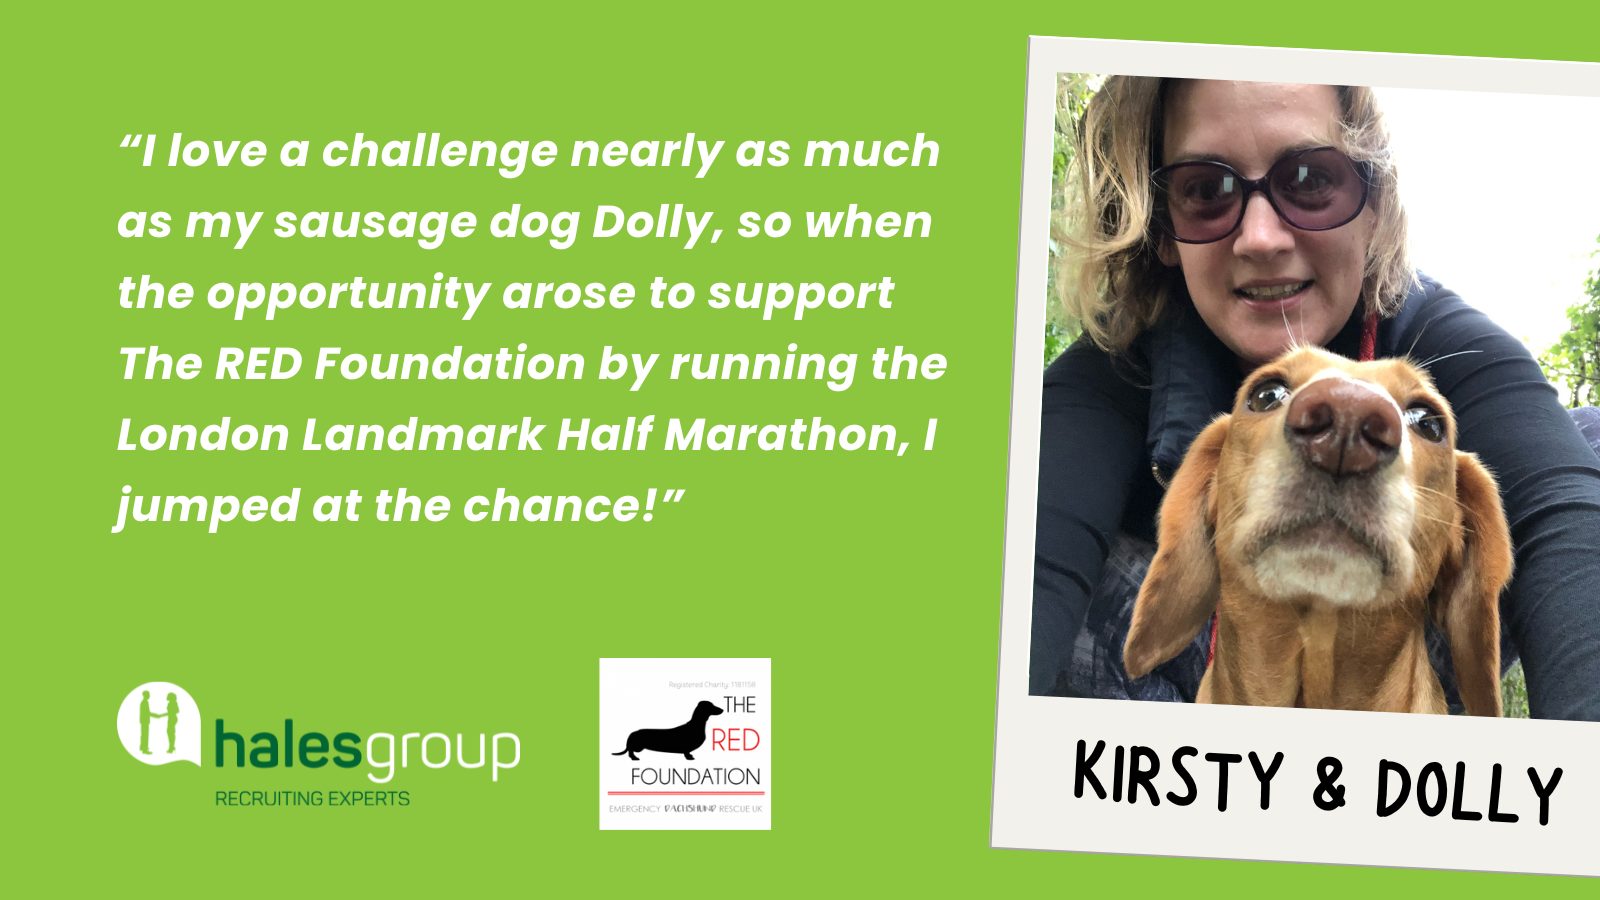 Kirsty Walpole, Hales Group Managing Director, is raising money for the red foundation